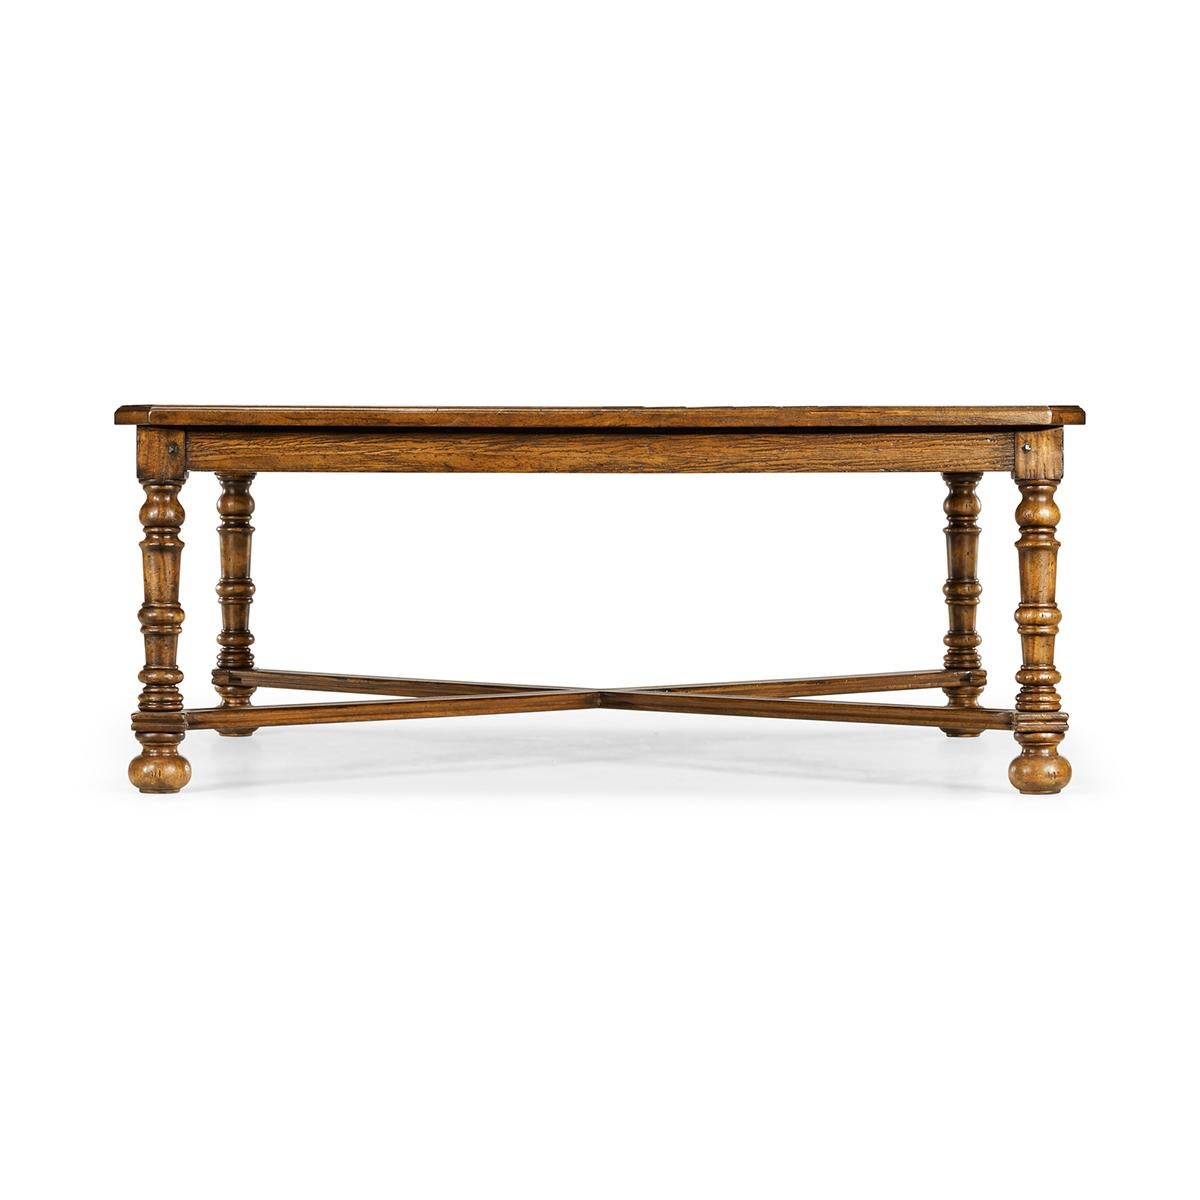 Large Country coffee table, heavily distressed large square walnut finish parquet top coffee table with a molded edge X-frame stretcher and raised on turned legs.

Dimensions: 50